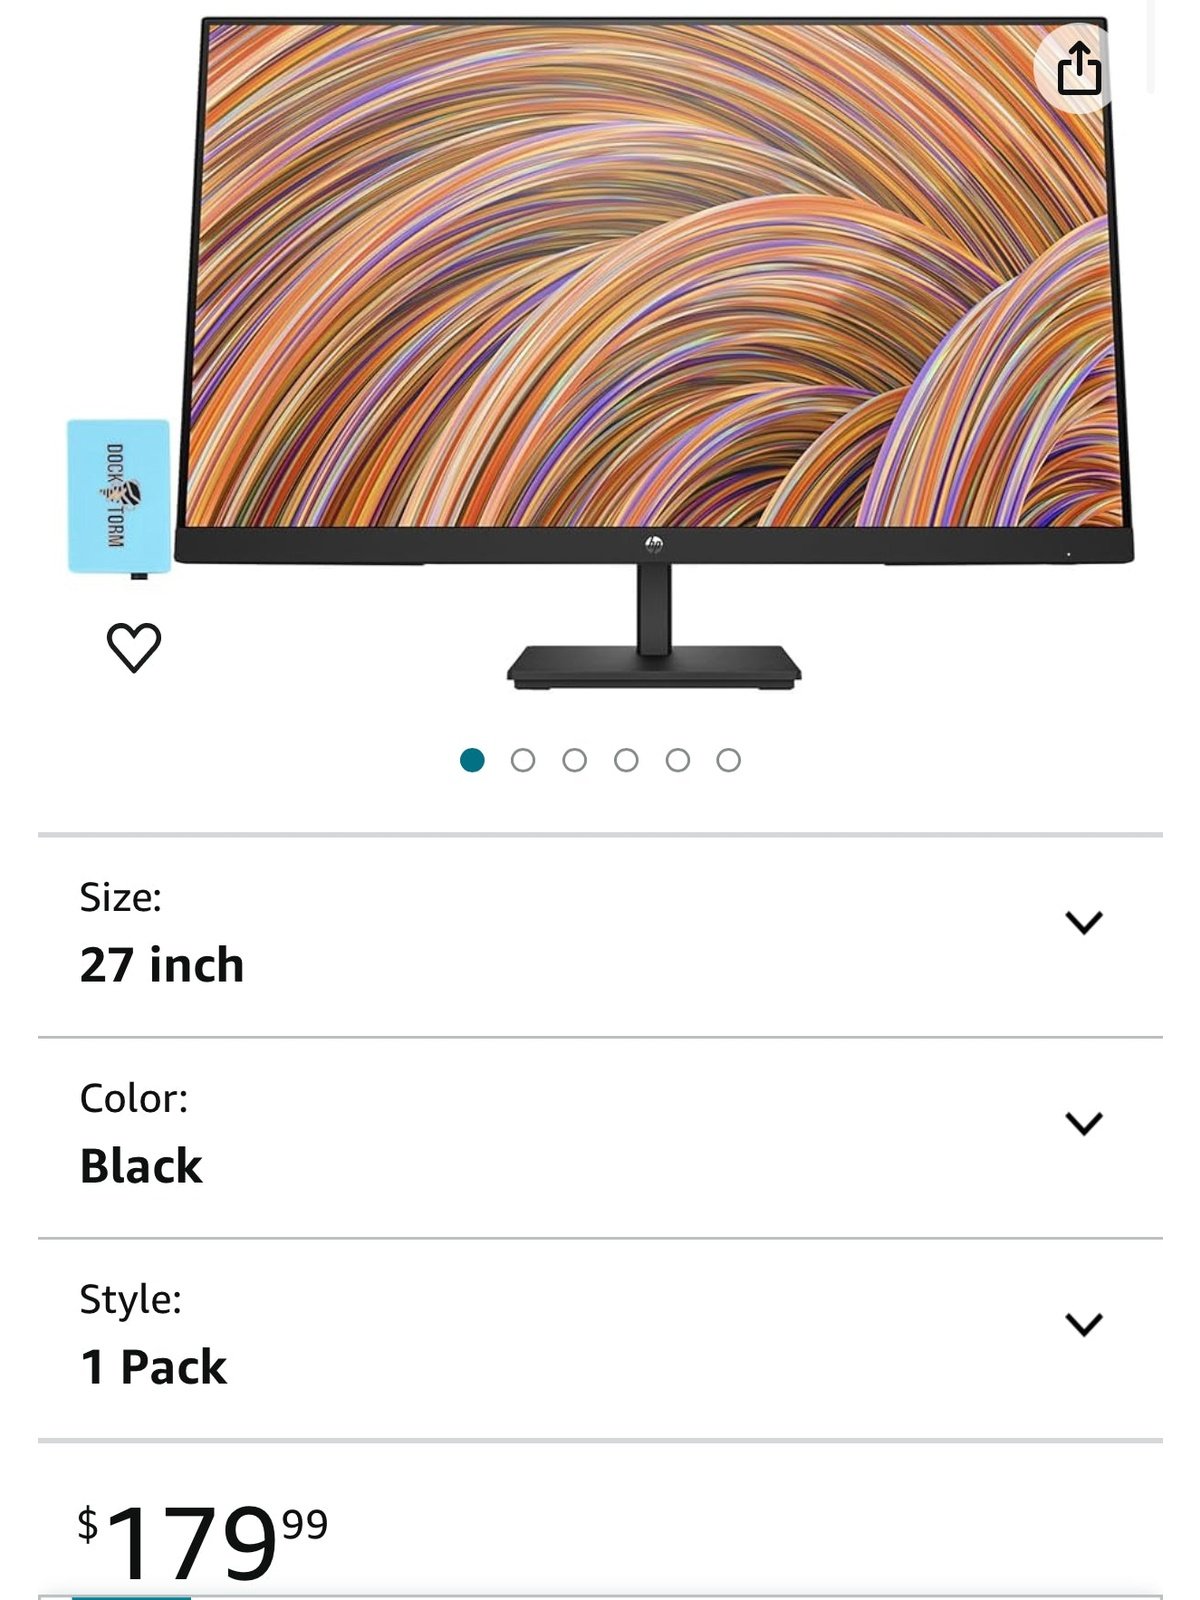 HP 27" FHD IPS 1920x1080 Monitor Bundle with Docztorm Dock, 75 Hz Refresh Rate, 1 HDMI 1.4, 1 Display Port 1.2, 1 VGA, Anti-Glare, Ideal for Office Work, Black 2024 Latest Model